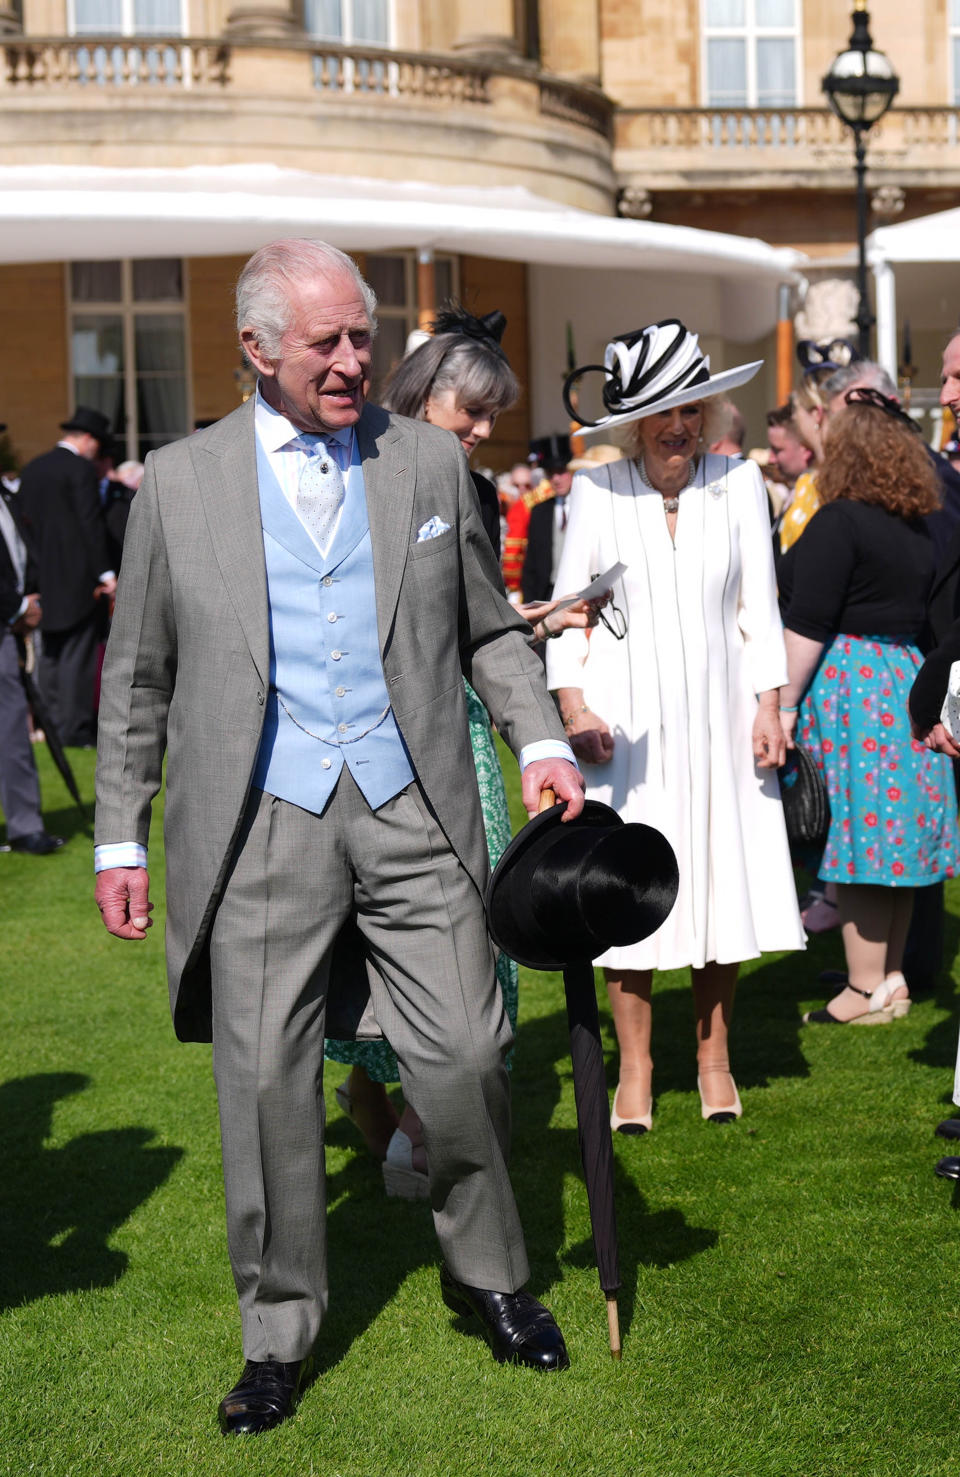 Queen Camilla in Chanel shoes.